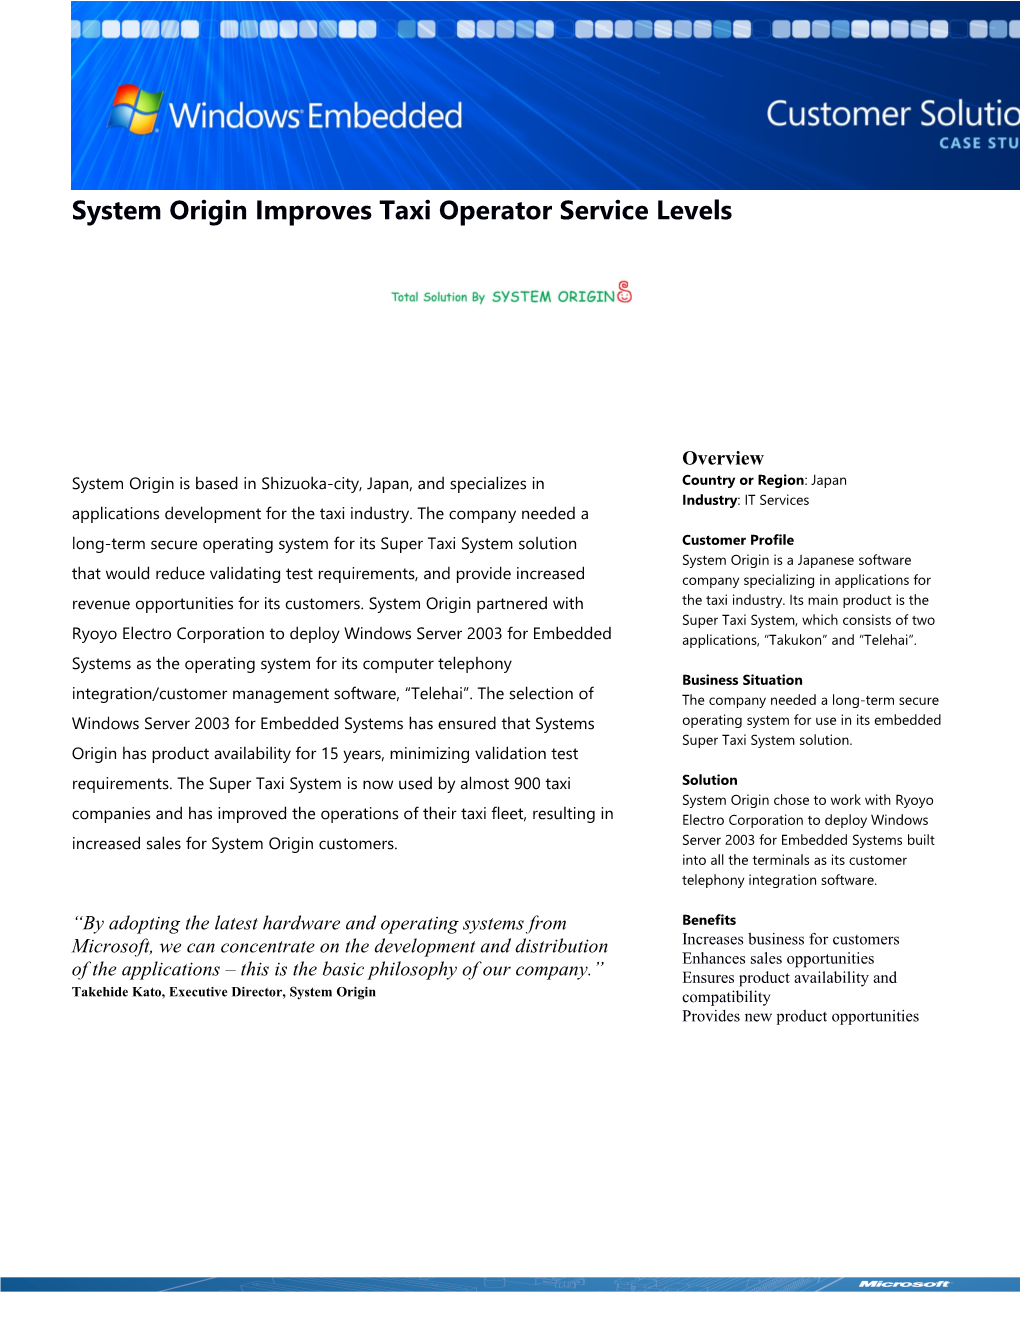 Metia Windows Embedded System Origin Improves Taxi Operator Service Levels